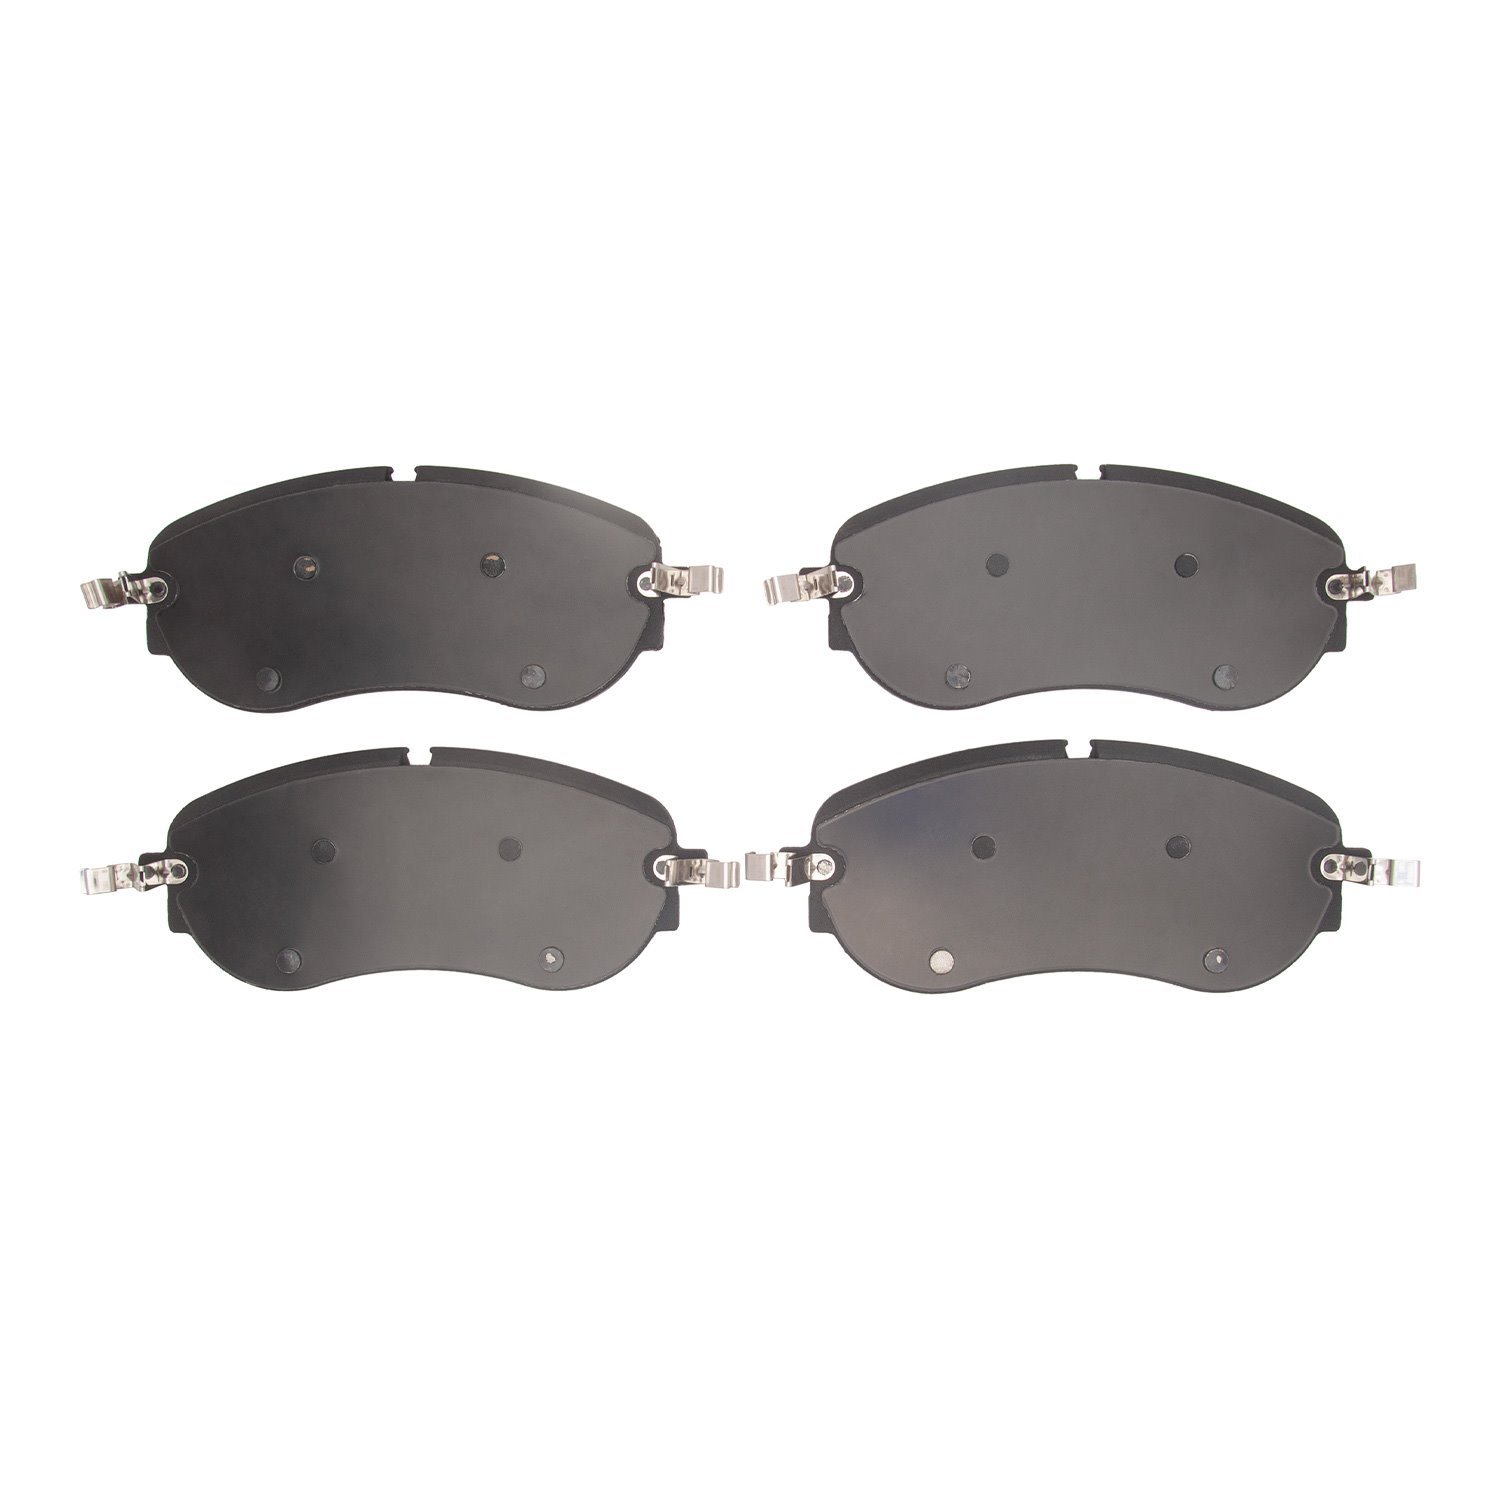 1551-2401-00 5000 Advanced Low-Metallic Brake Pads, Fits Select Audi/Volkswagen, Position: Front